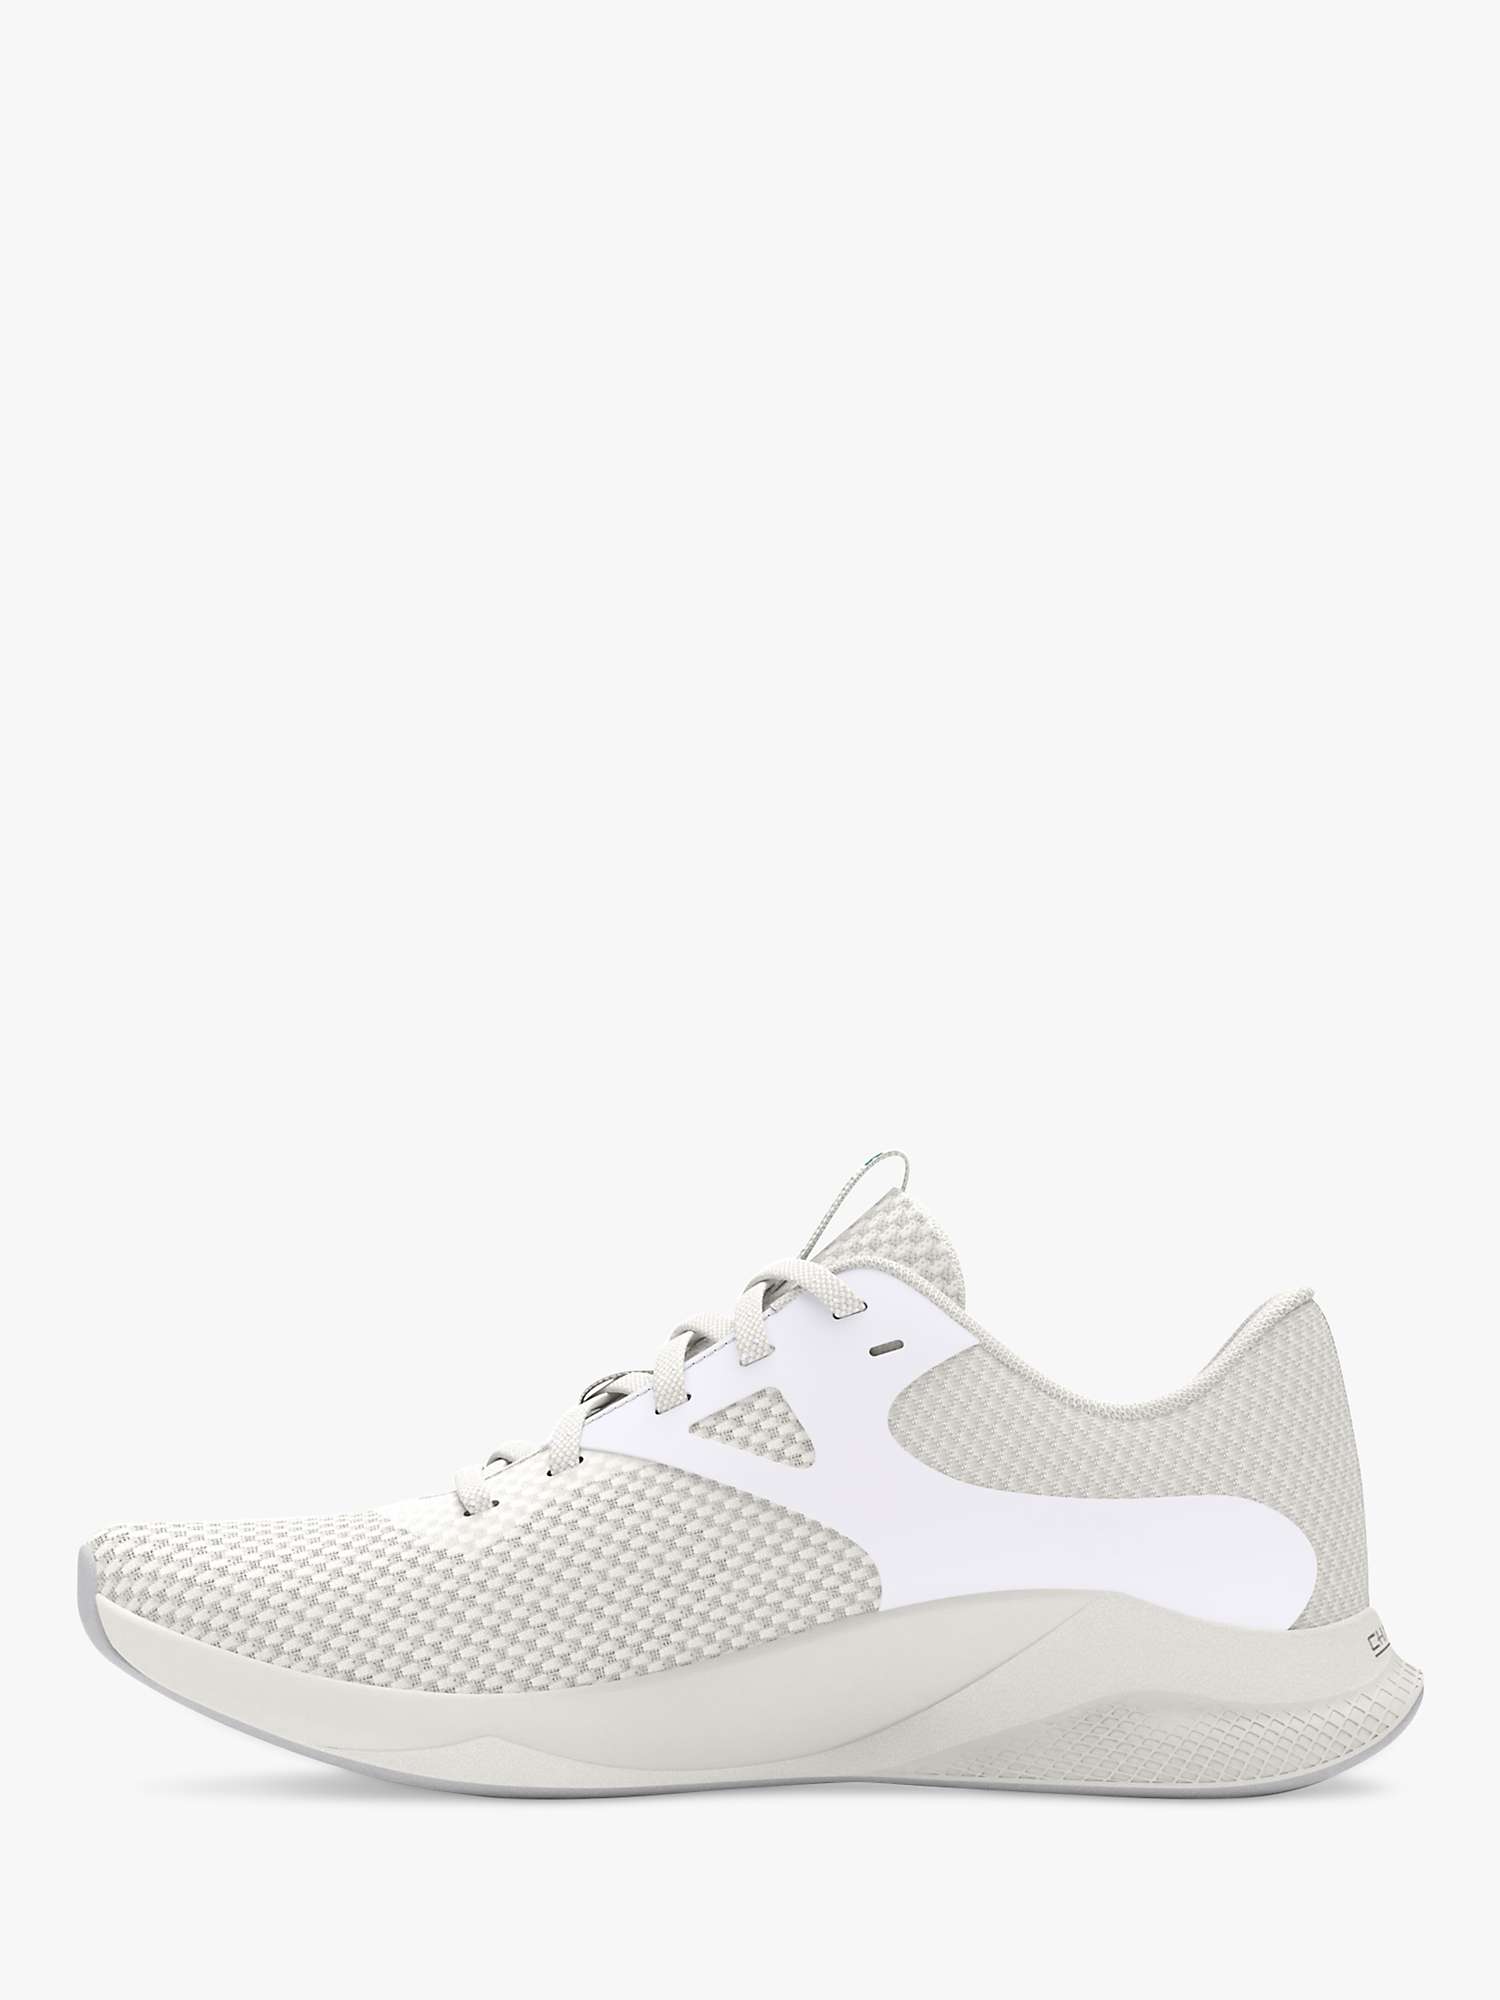 Buy Under Armour Charged Aurora 2 Women's Cross Trainers Online at johnlewis.com